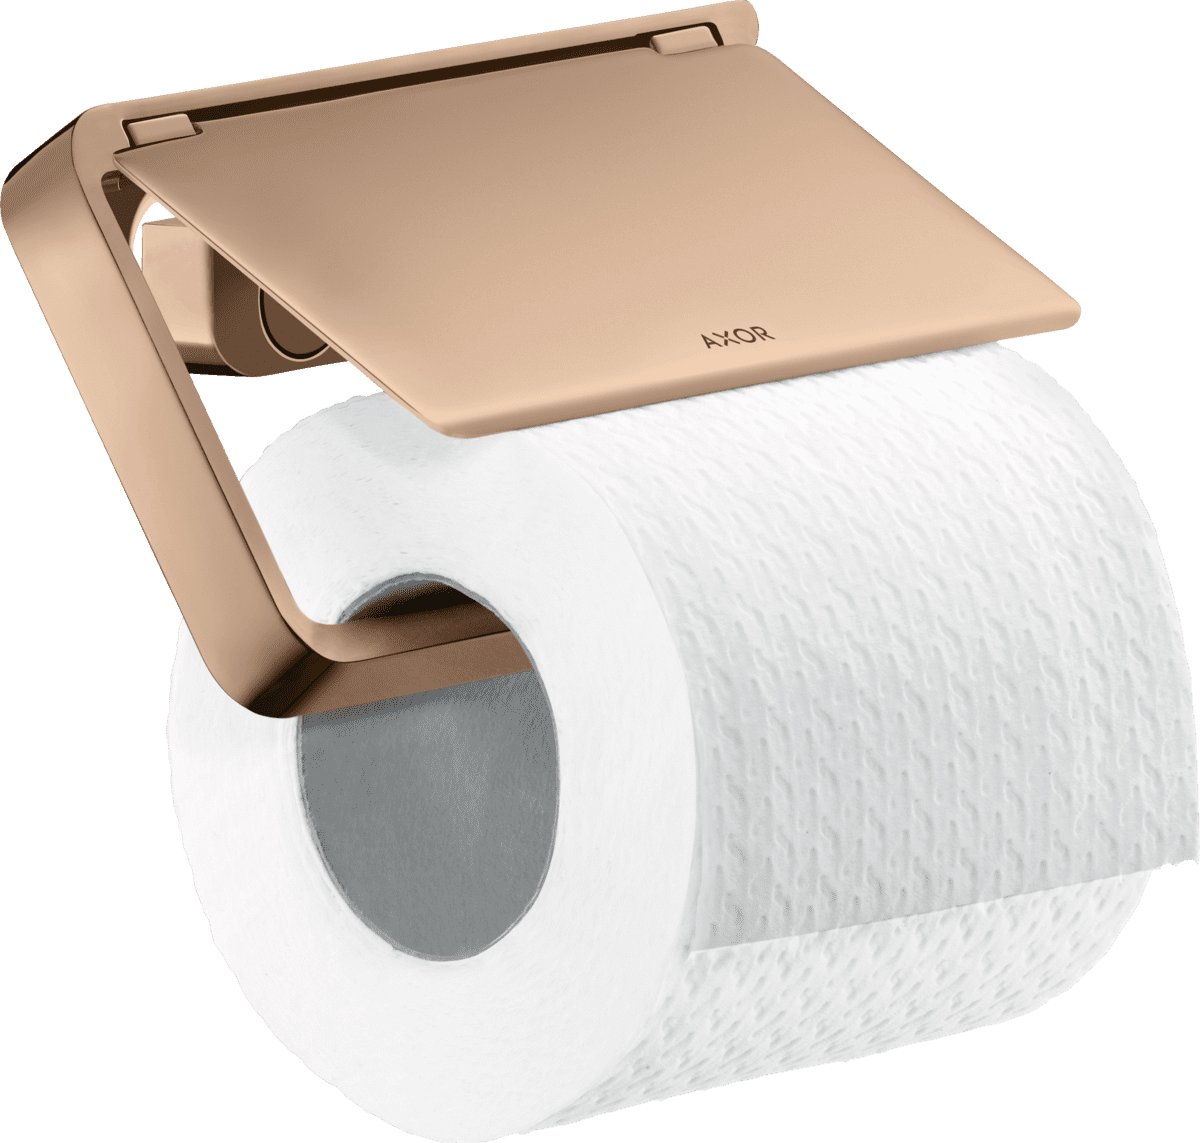 Picture of HANSGROHE AXOR Universal Softsquare Toilet paper holder with cover #42836300 - Polished Red Gold